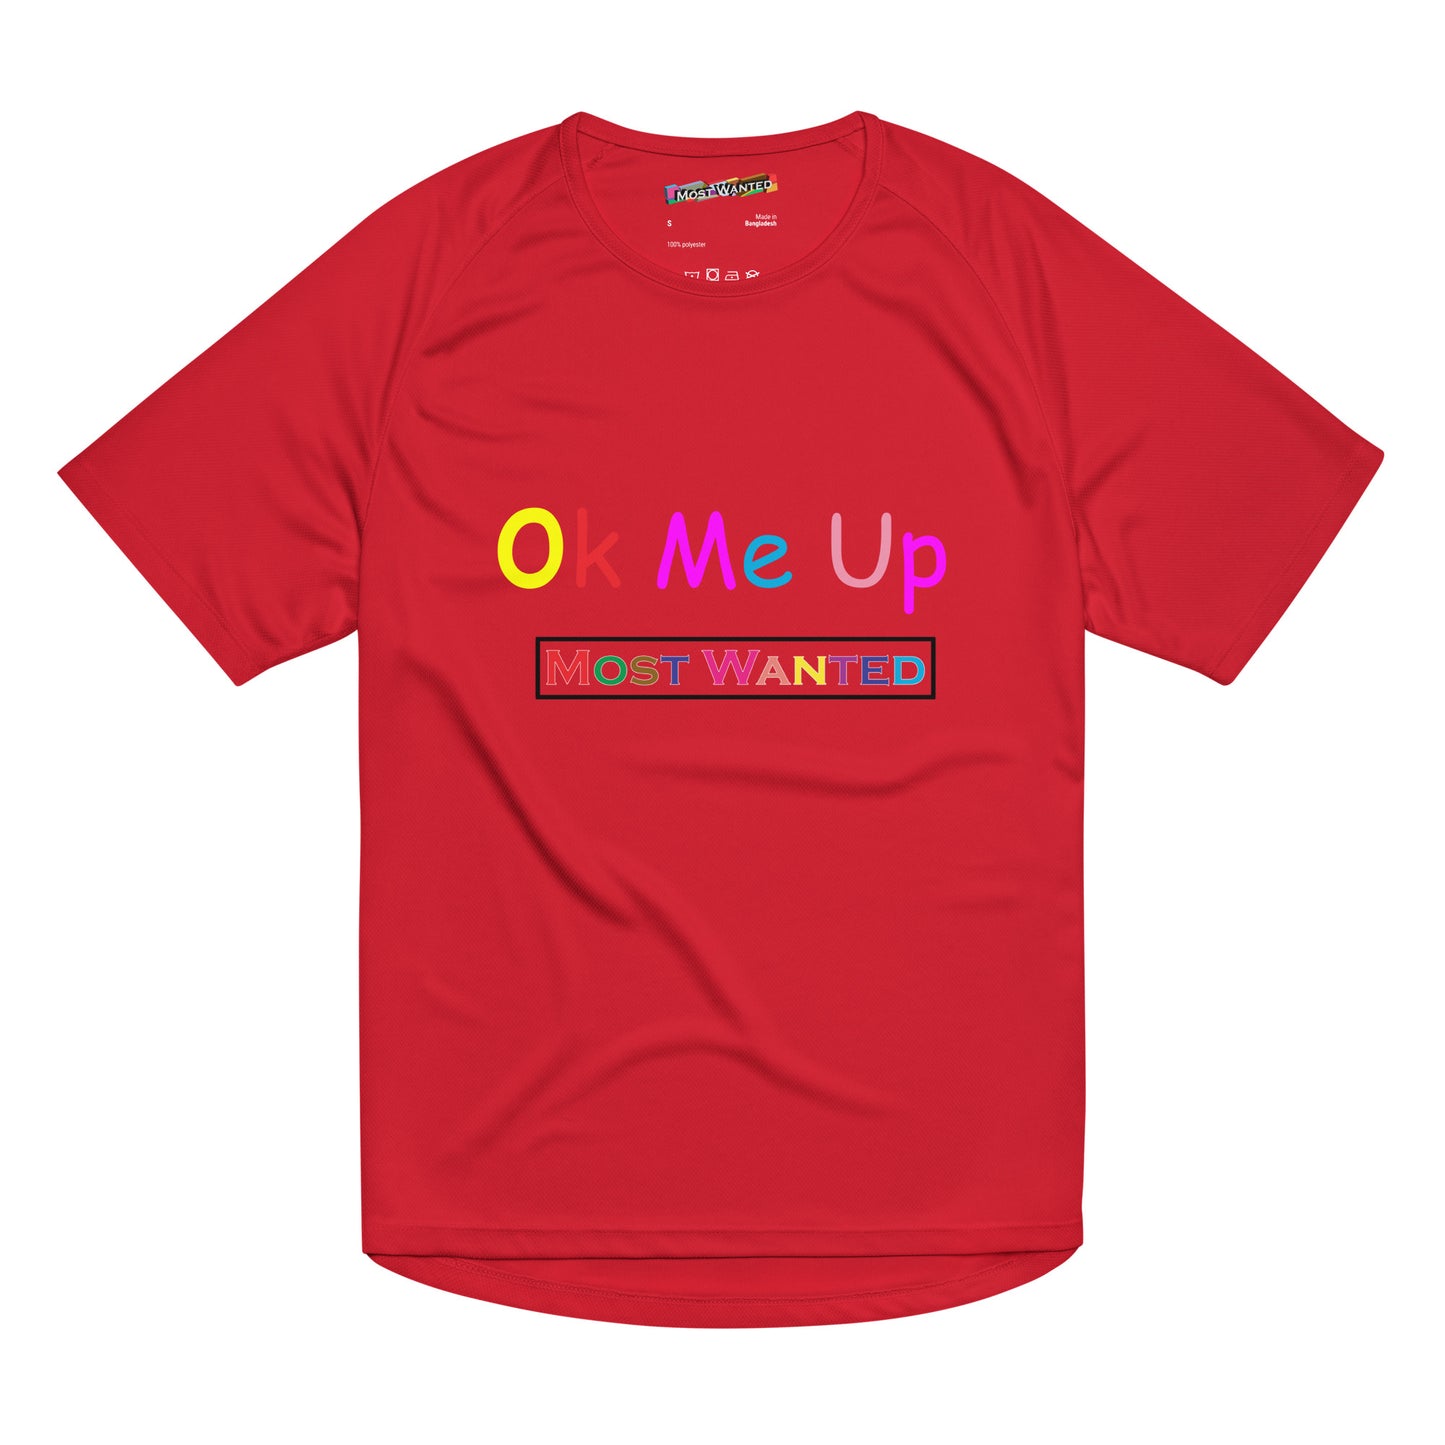 Ok Me Up (Most Wanted) Unisex sports Tee jersey